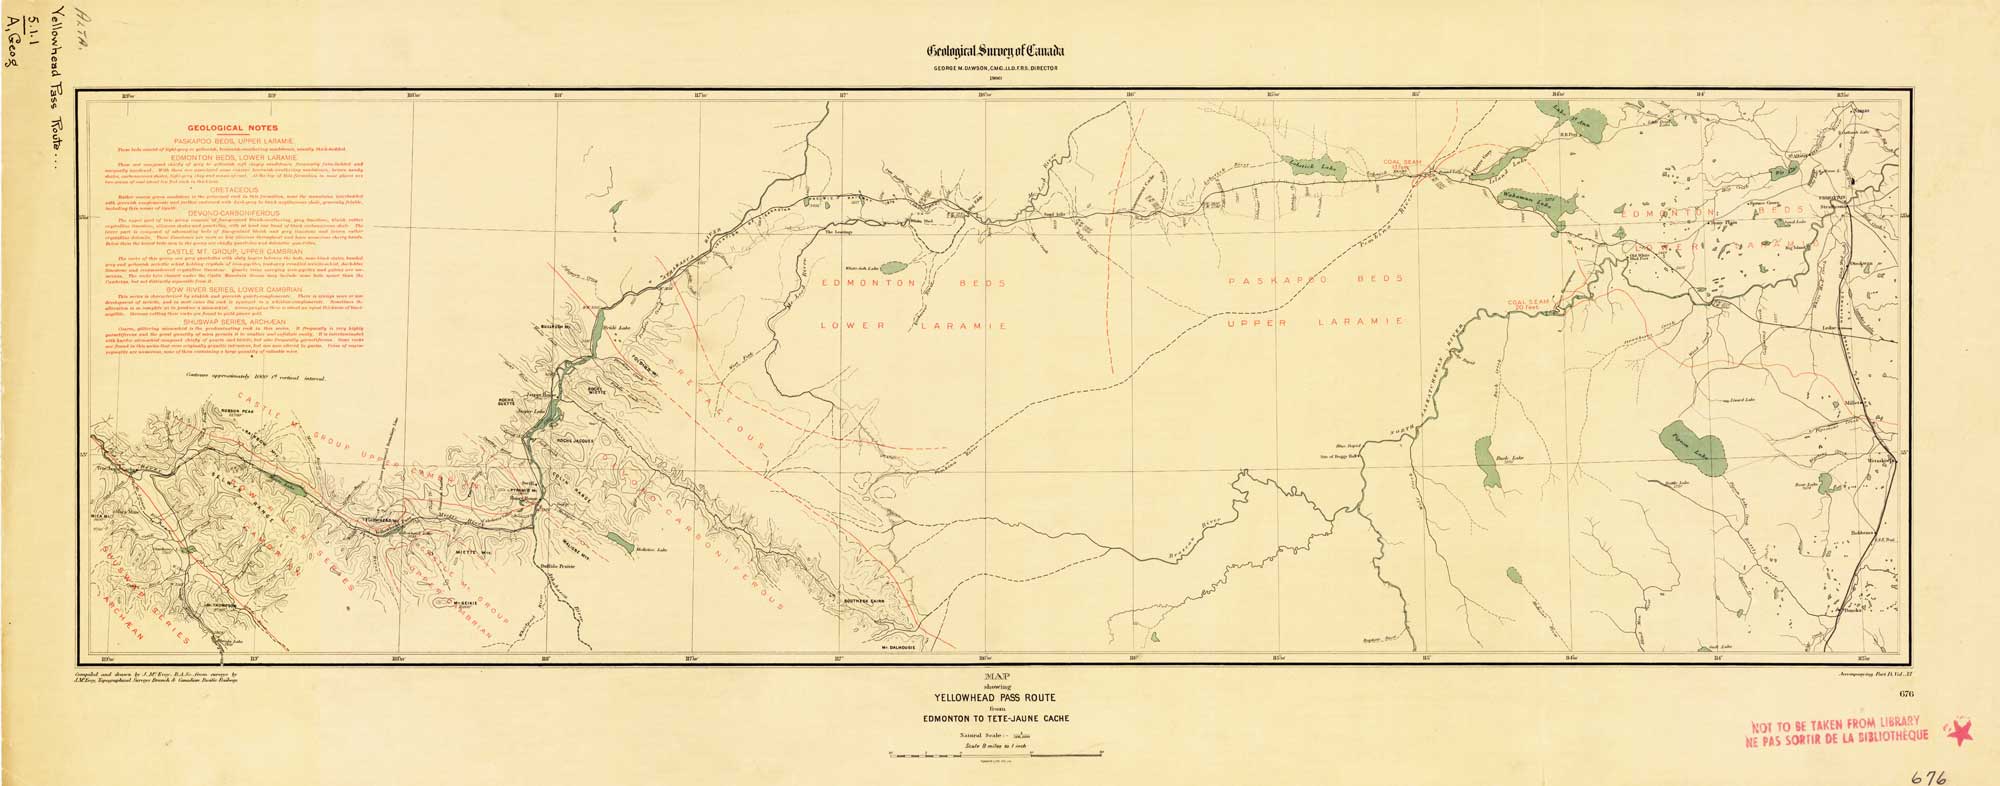 Map Showing Yellowhead Pass Route From Edmonton To Tête-Jaune Cache. James McEvoy, 1900.